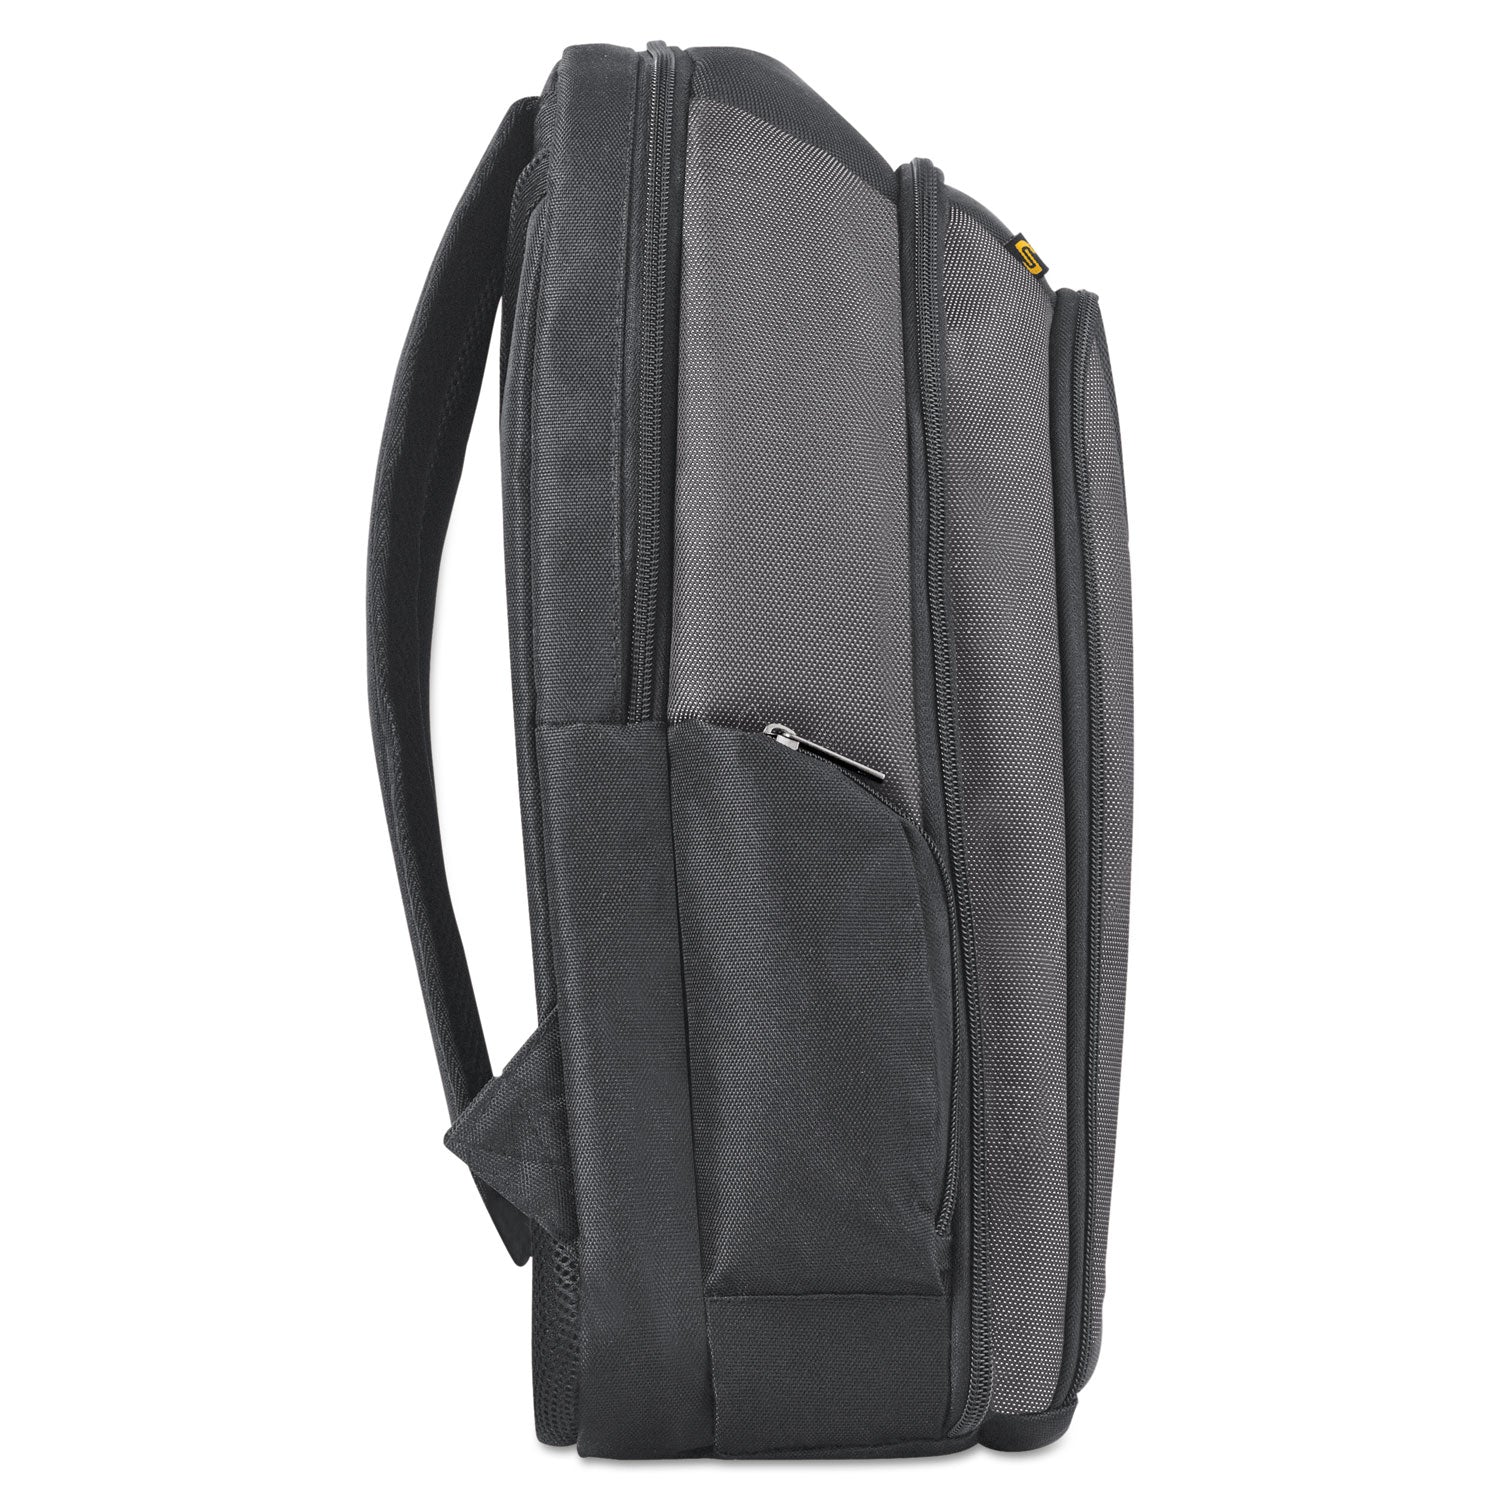 Pro CheckFast Backpack, Fits Devices Up to 16", Ballistic Polyester, 13.75 x 6.5 x 17.75, Black - 